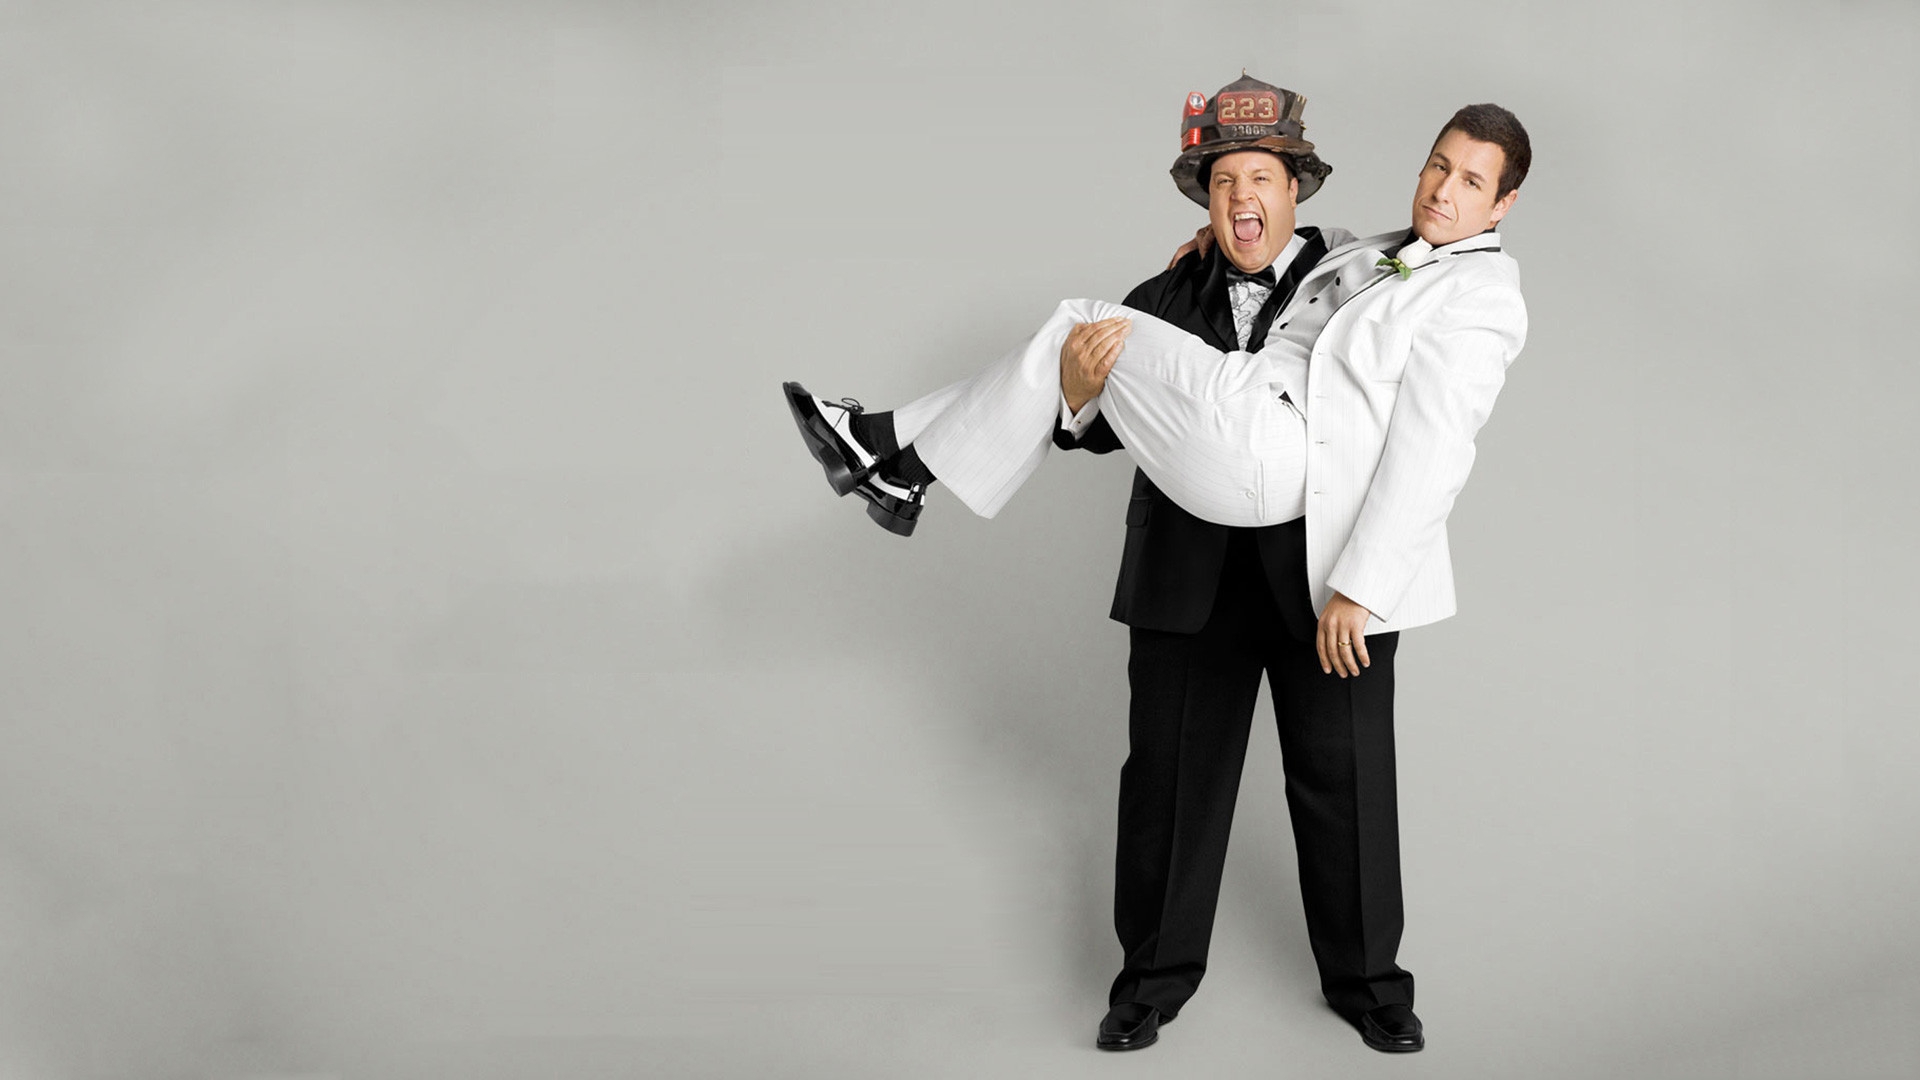 Wallpaper, i now pronounce you chuck and larry, adam sandler, kevin james, comedy, fun 1920x1080